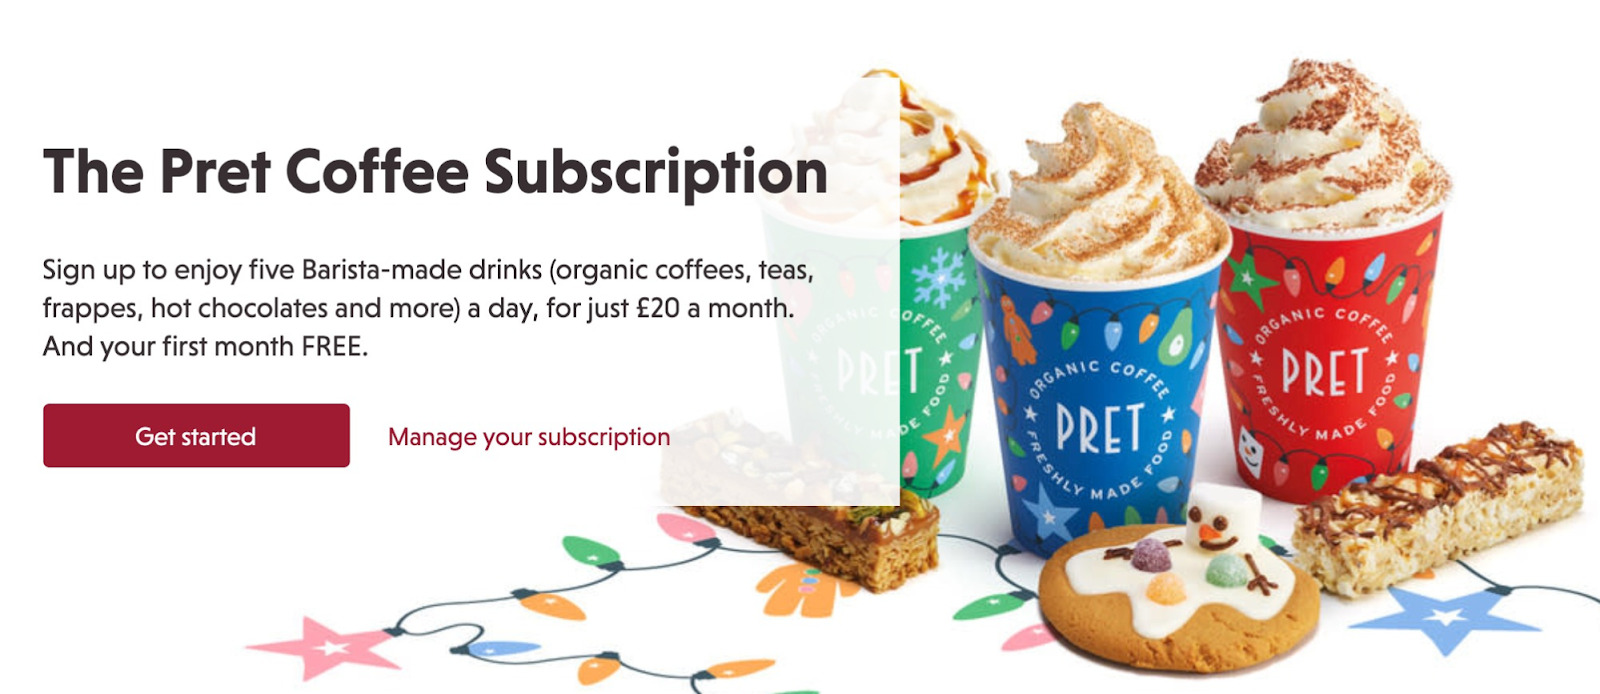 Pret Coffee's CTA asking people to sign up for subscription